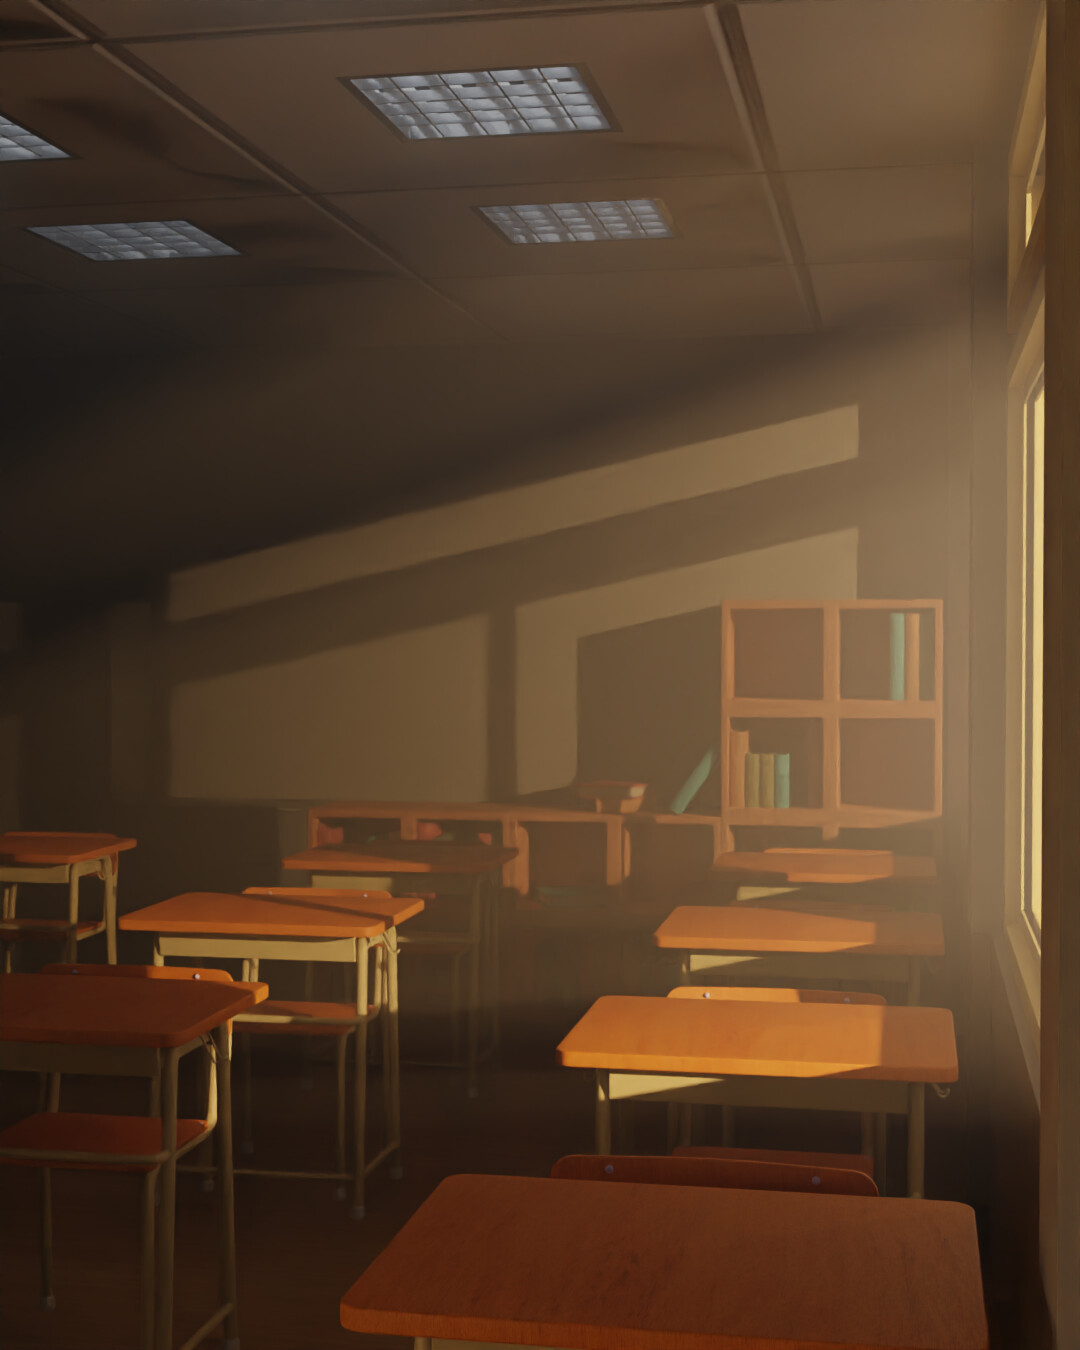 School Classroom Background, School, Classroom, Campus Background Image And  Wallpaper for Free Download